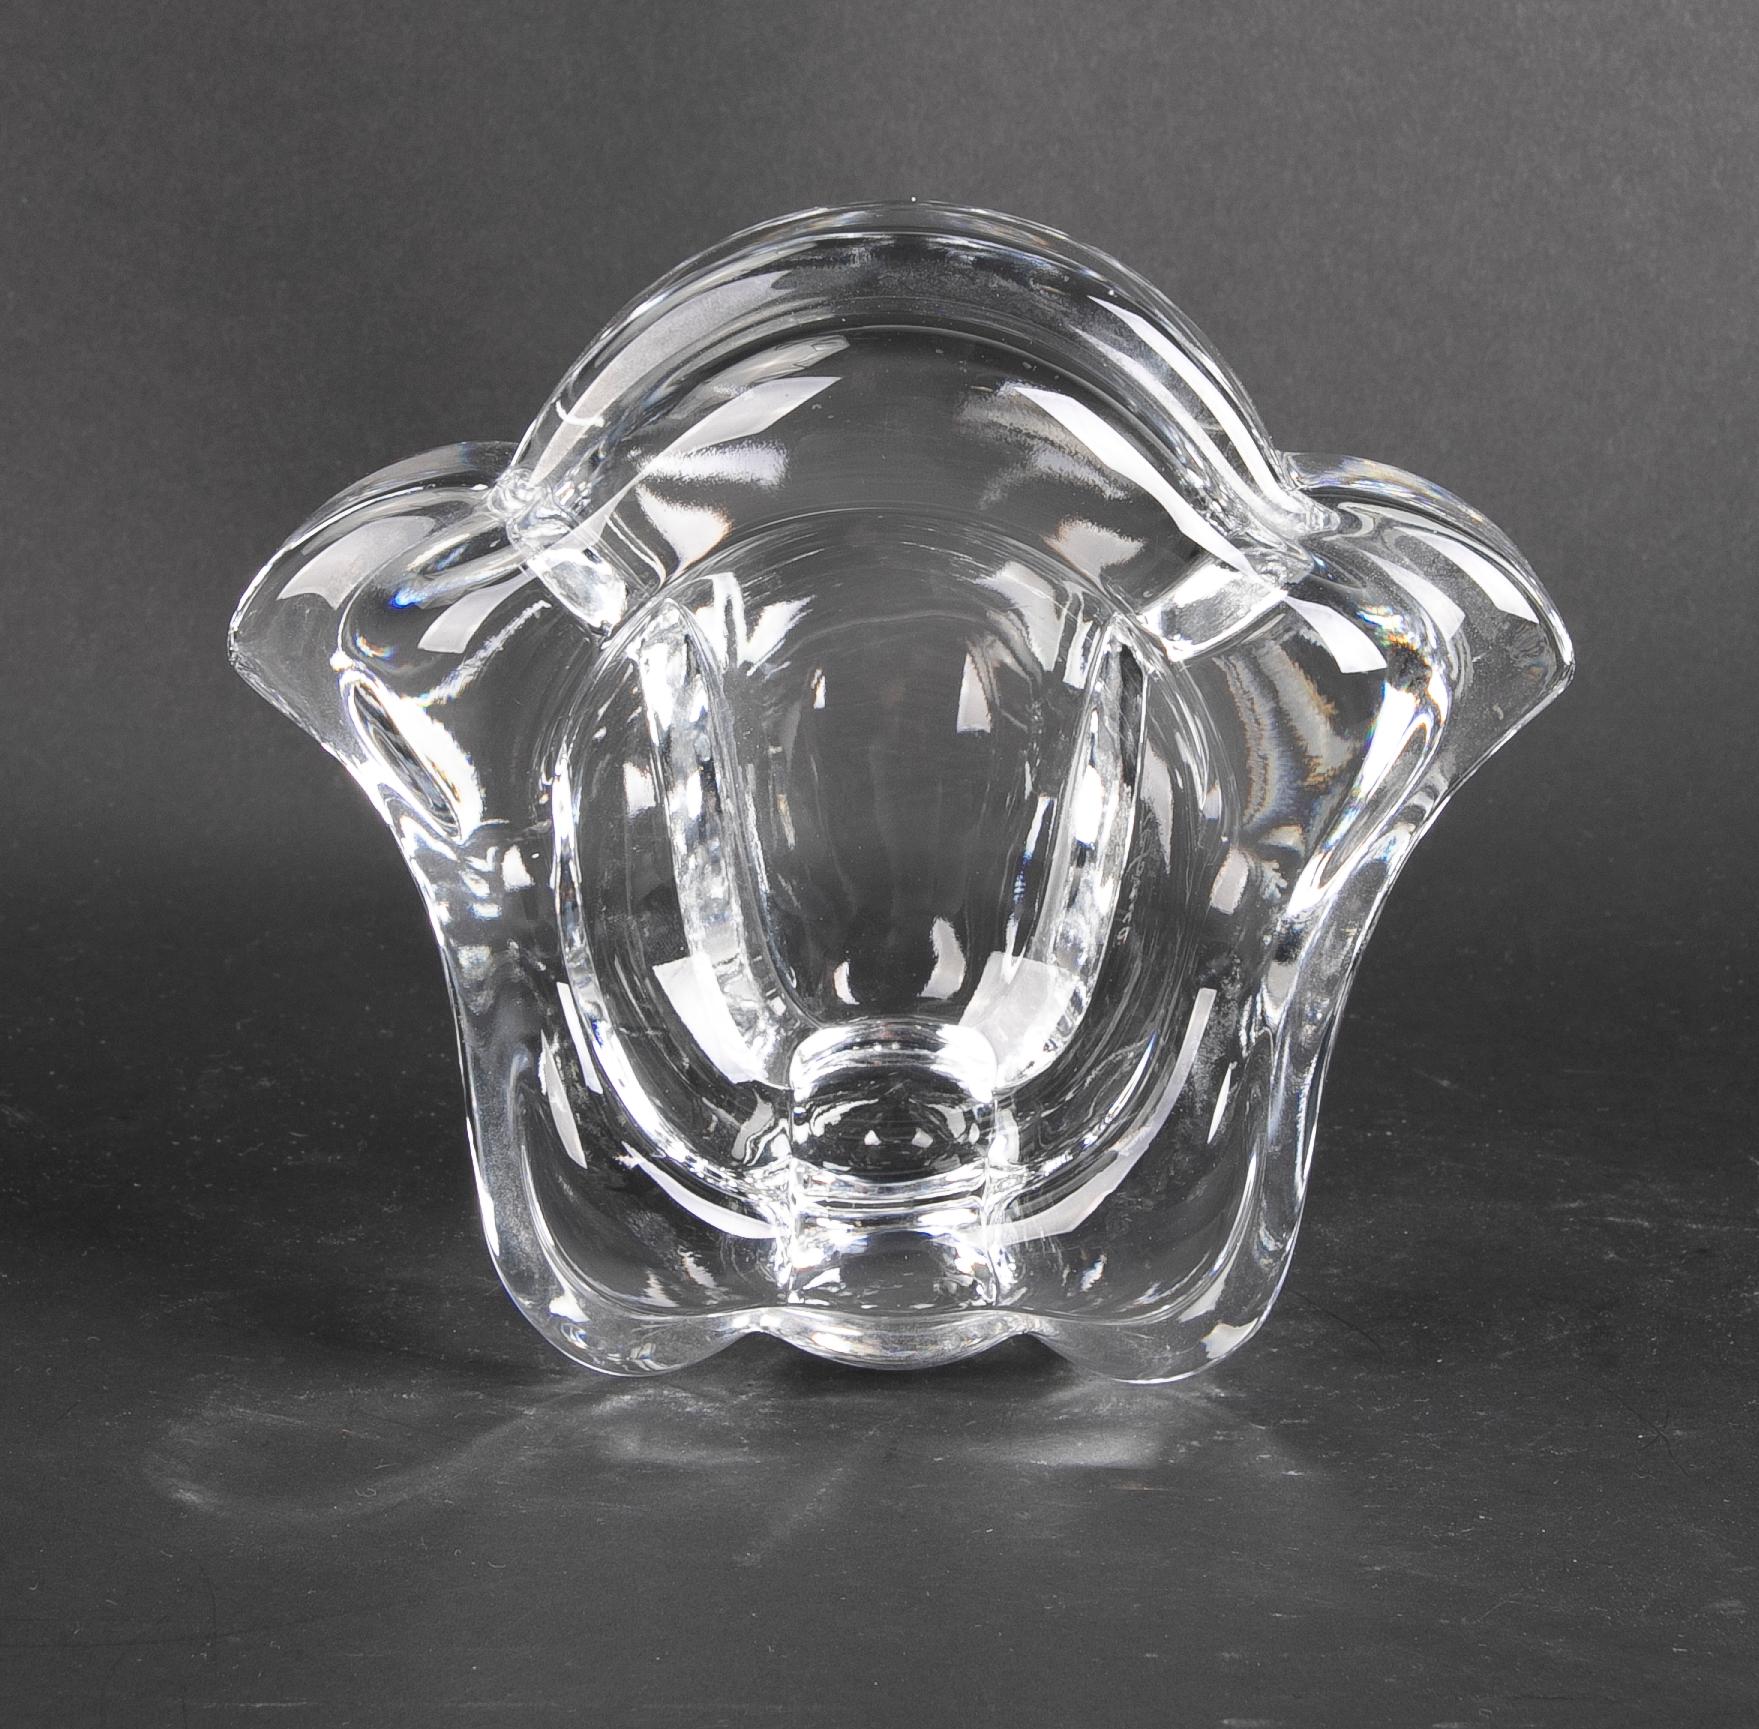 Solid crystal ashtray in the shape of a flower.